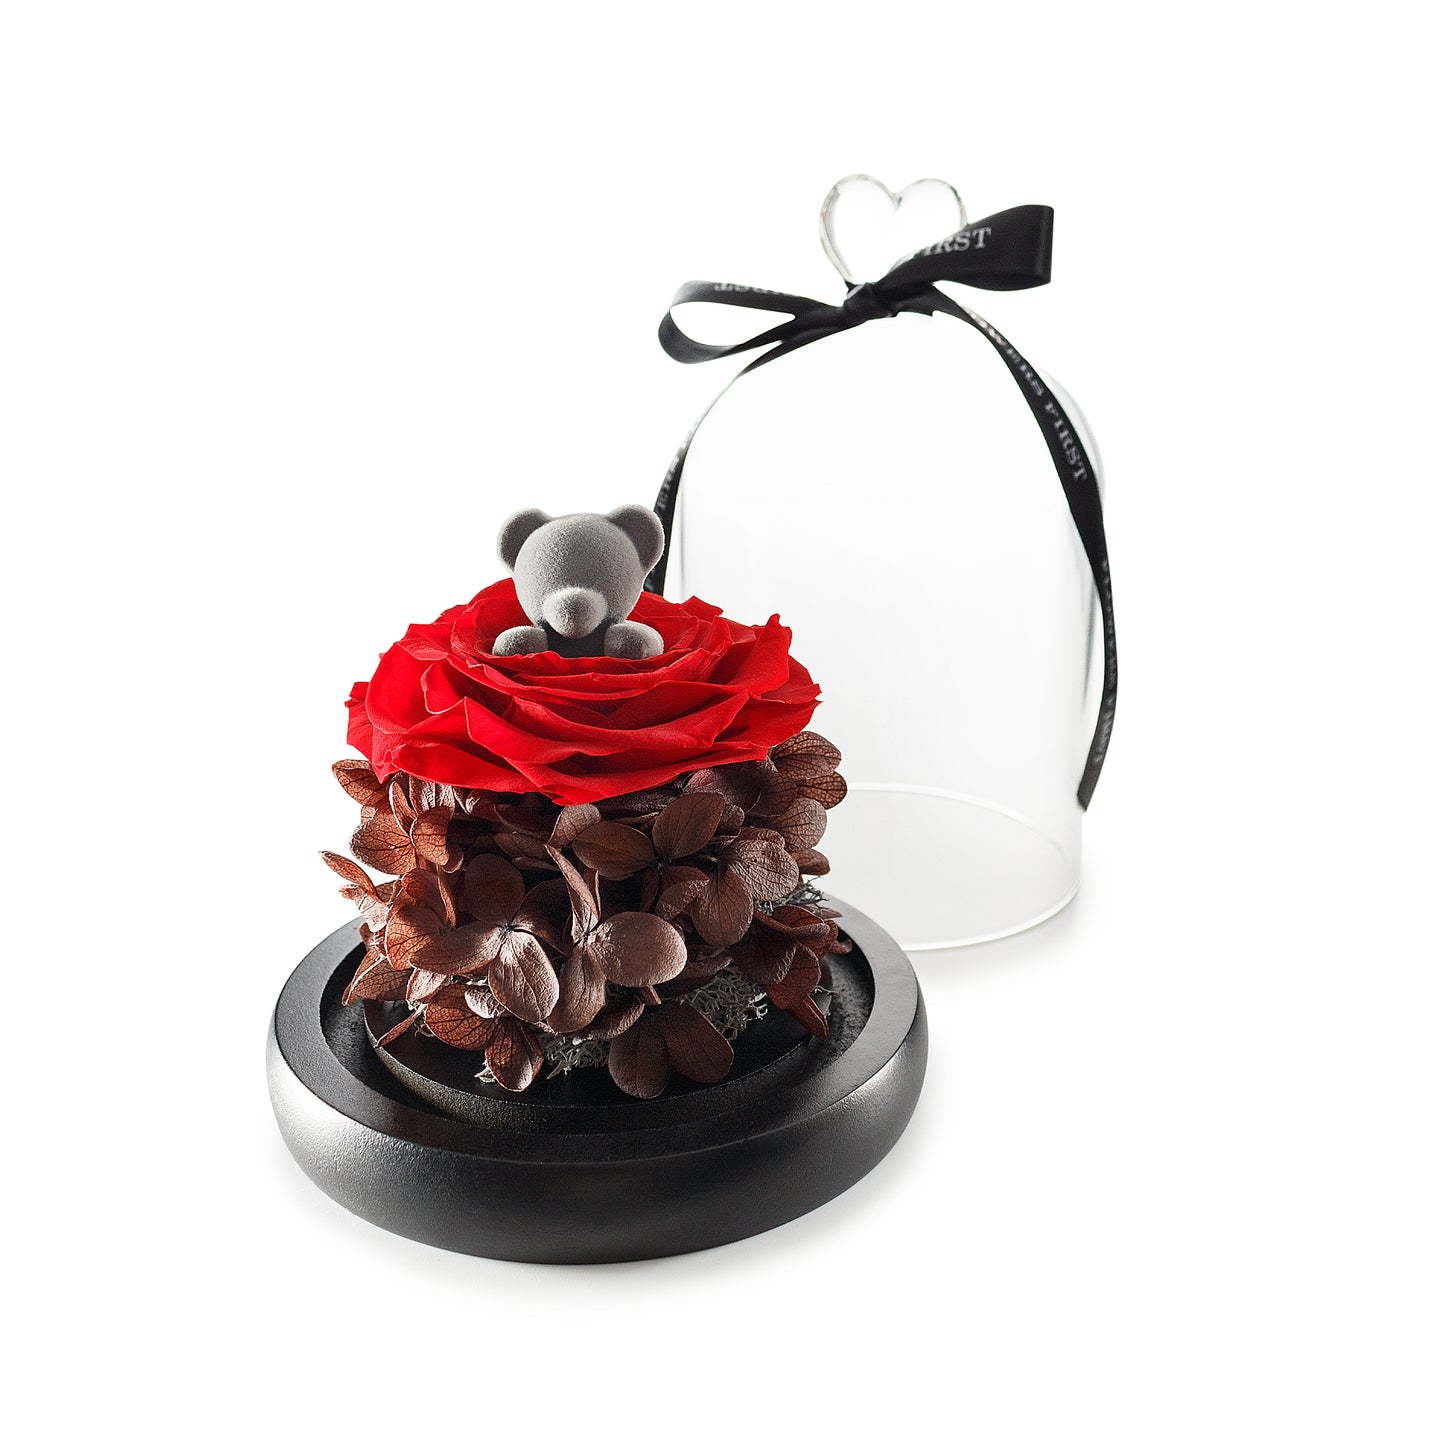 Eternity Red Rose with Teddy in Glass Dome